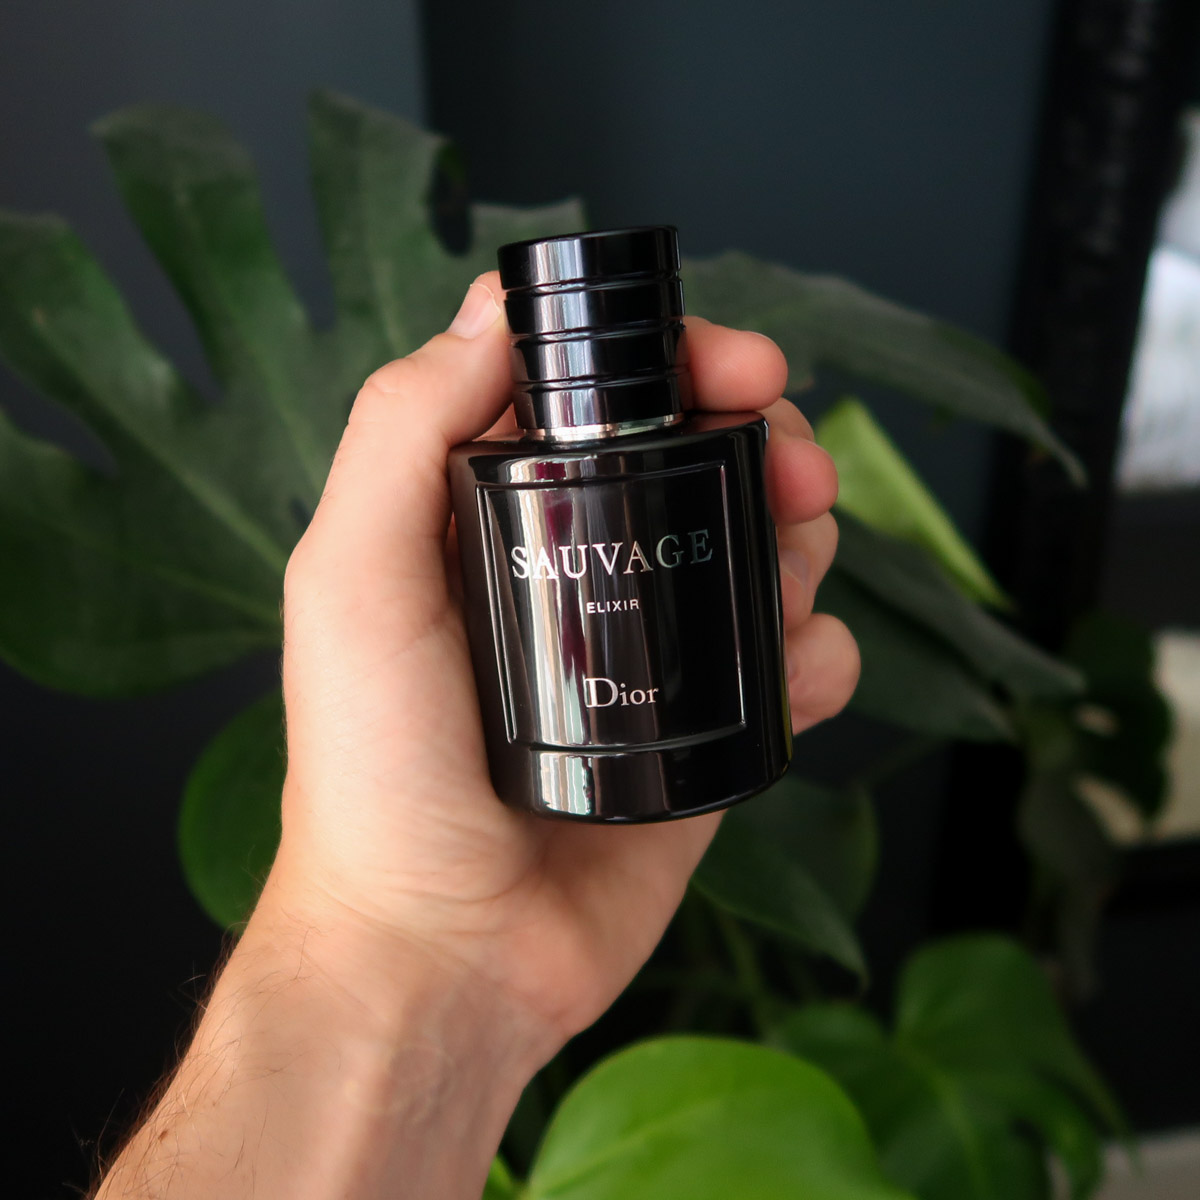 dior-sauvage-elixir-review-man-for-himself